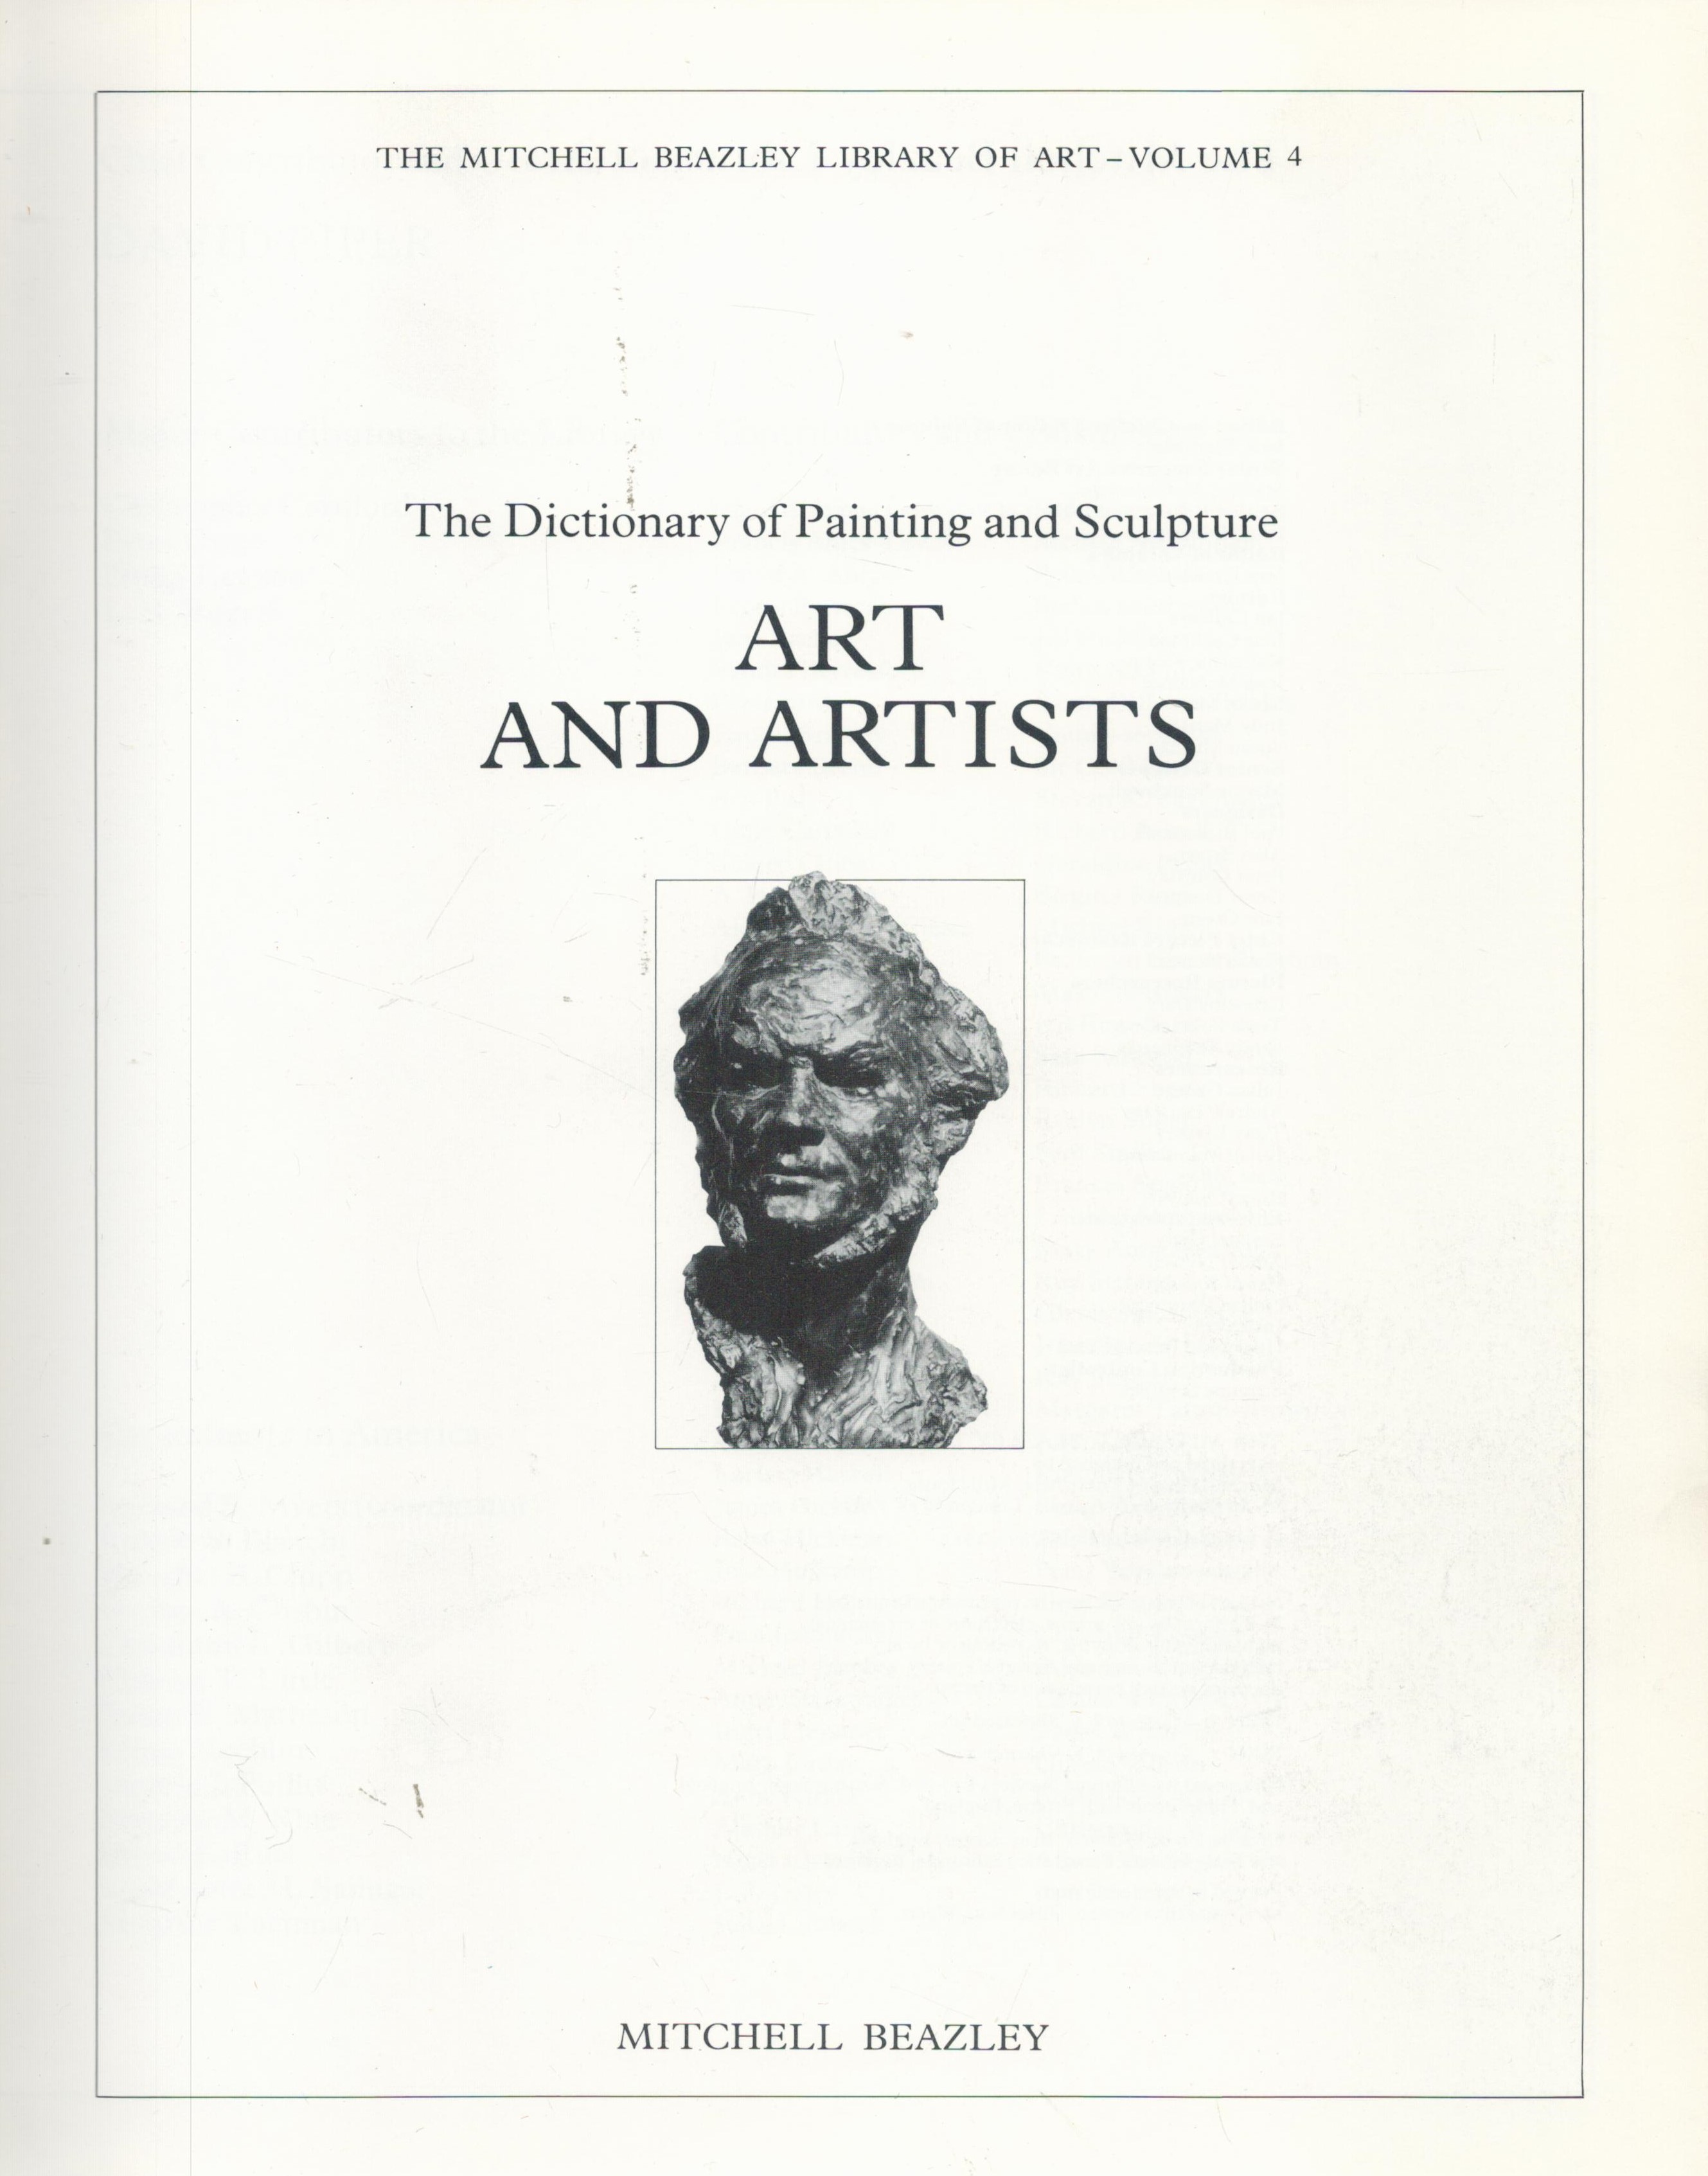 The Dictionary Of Painting And Sculpture Art and Artists First Edition Hardback Book with 192 - Image 2 of 3